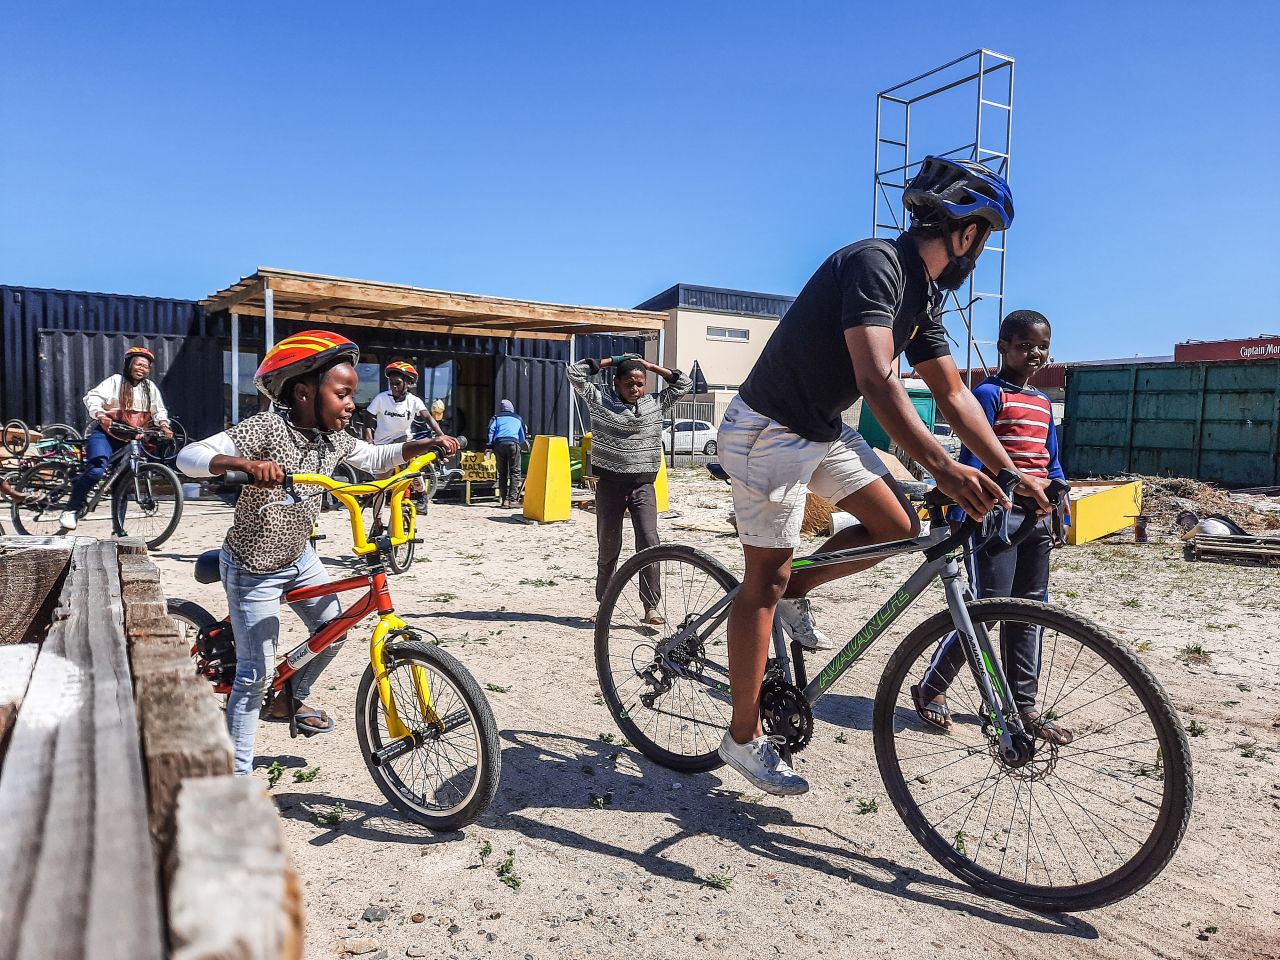 Sindile Mavundla says over 1,200 students have learned to ride through Bike2Learn workshops.